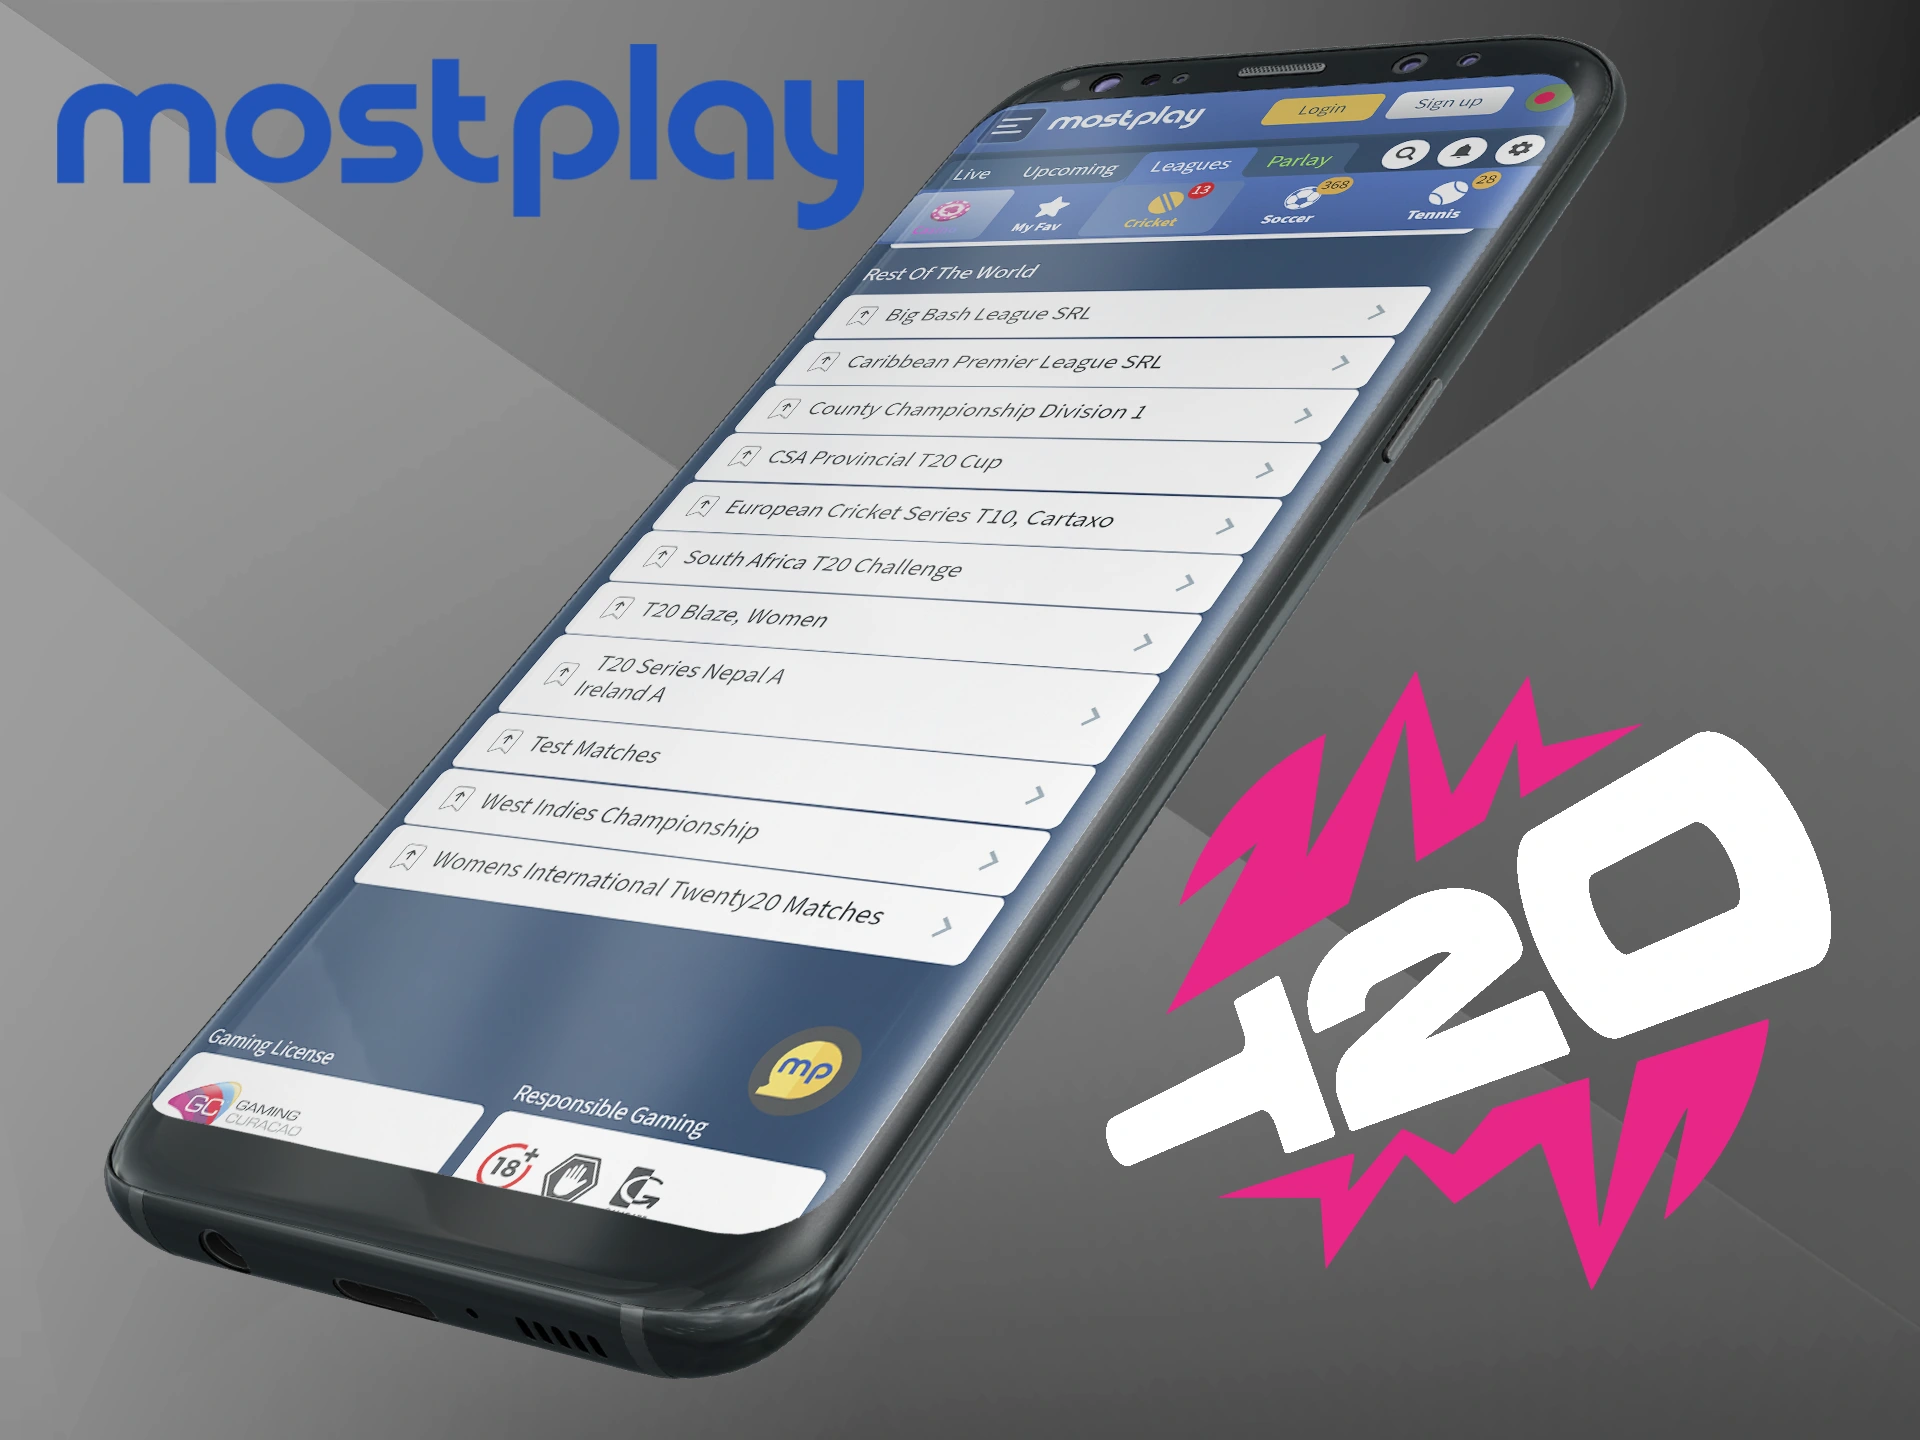 Find out who will be the winner of the T20 World Cup with Mostplay.